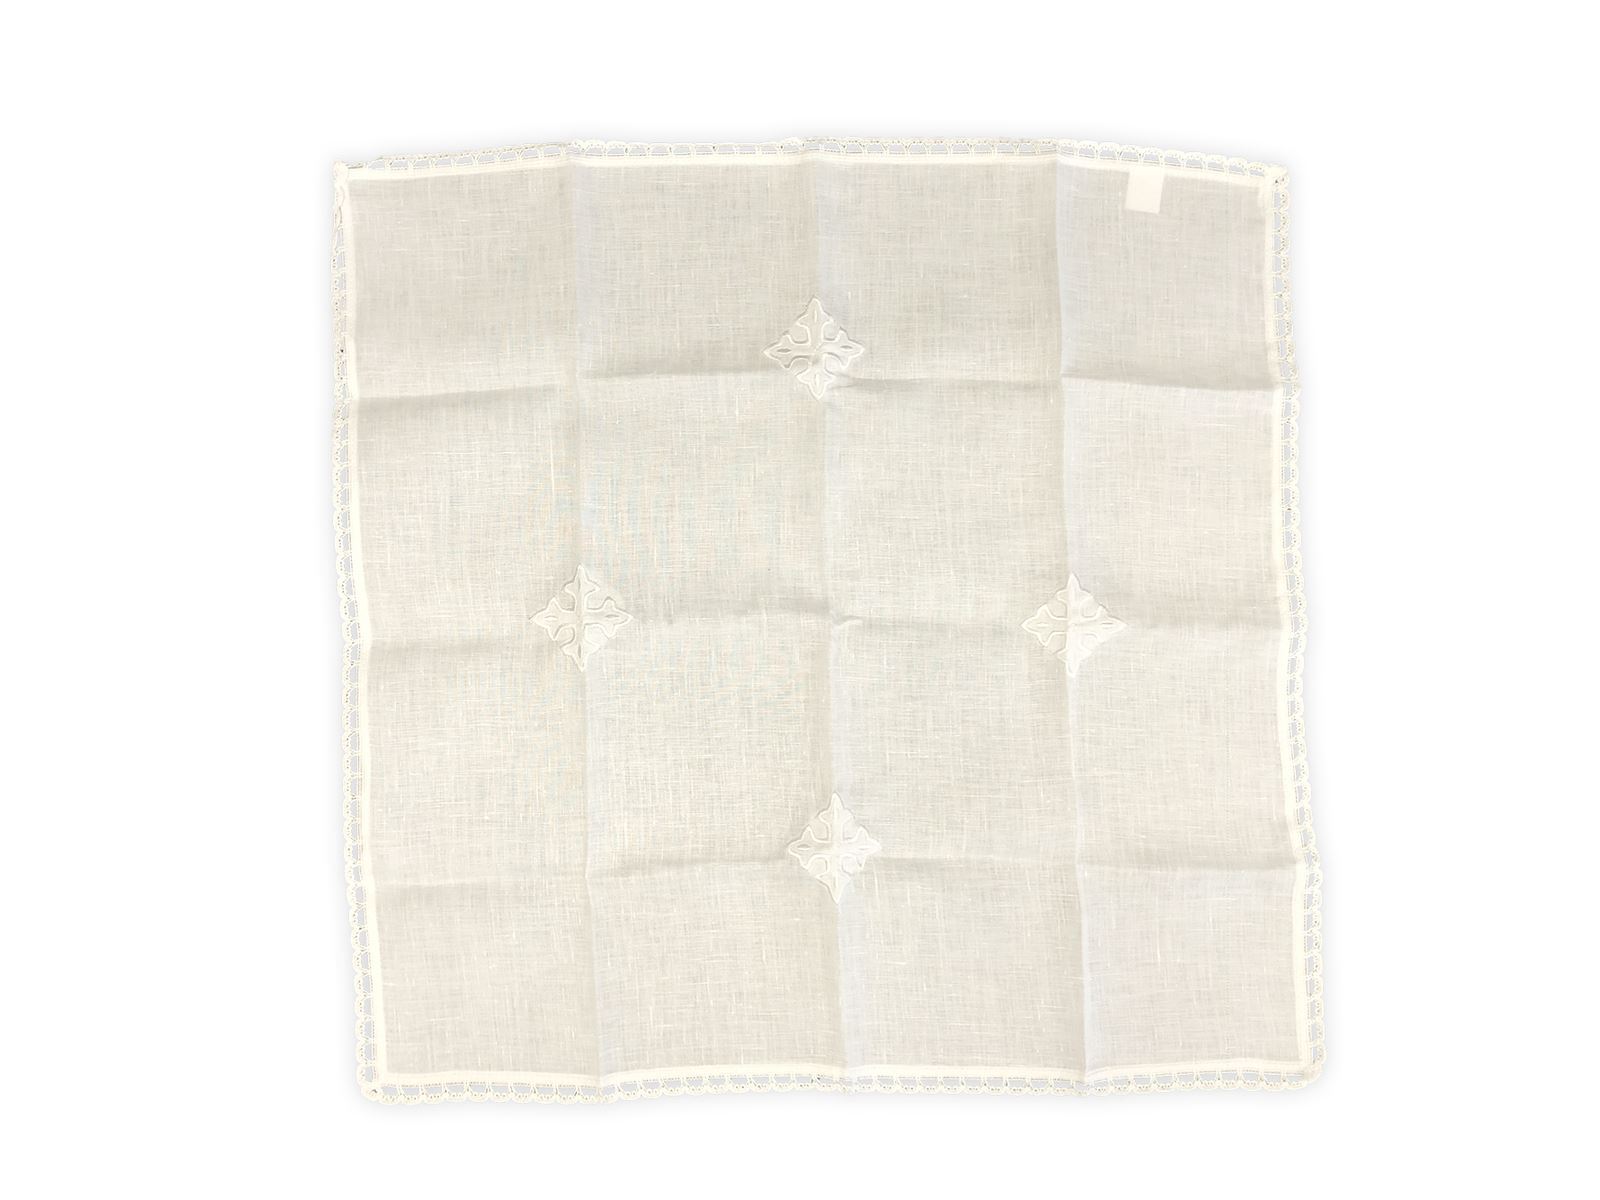 Corporal Linen Embrodiered with White Cross and Lace Trim | Gatto ...